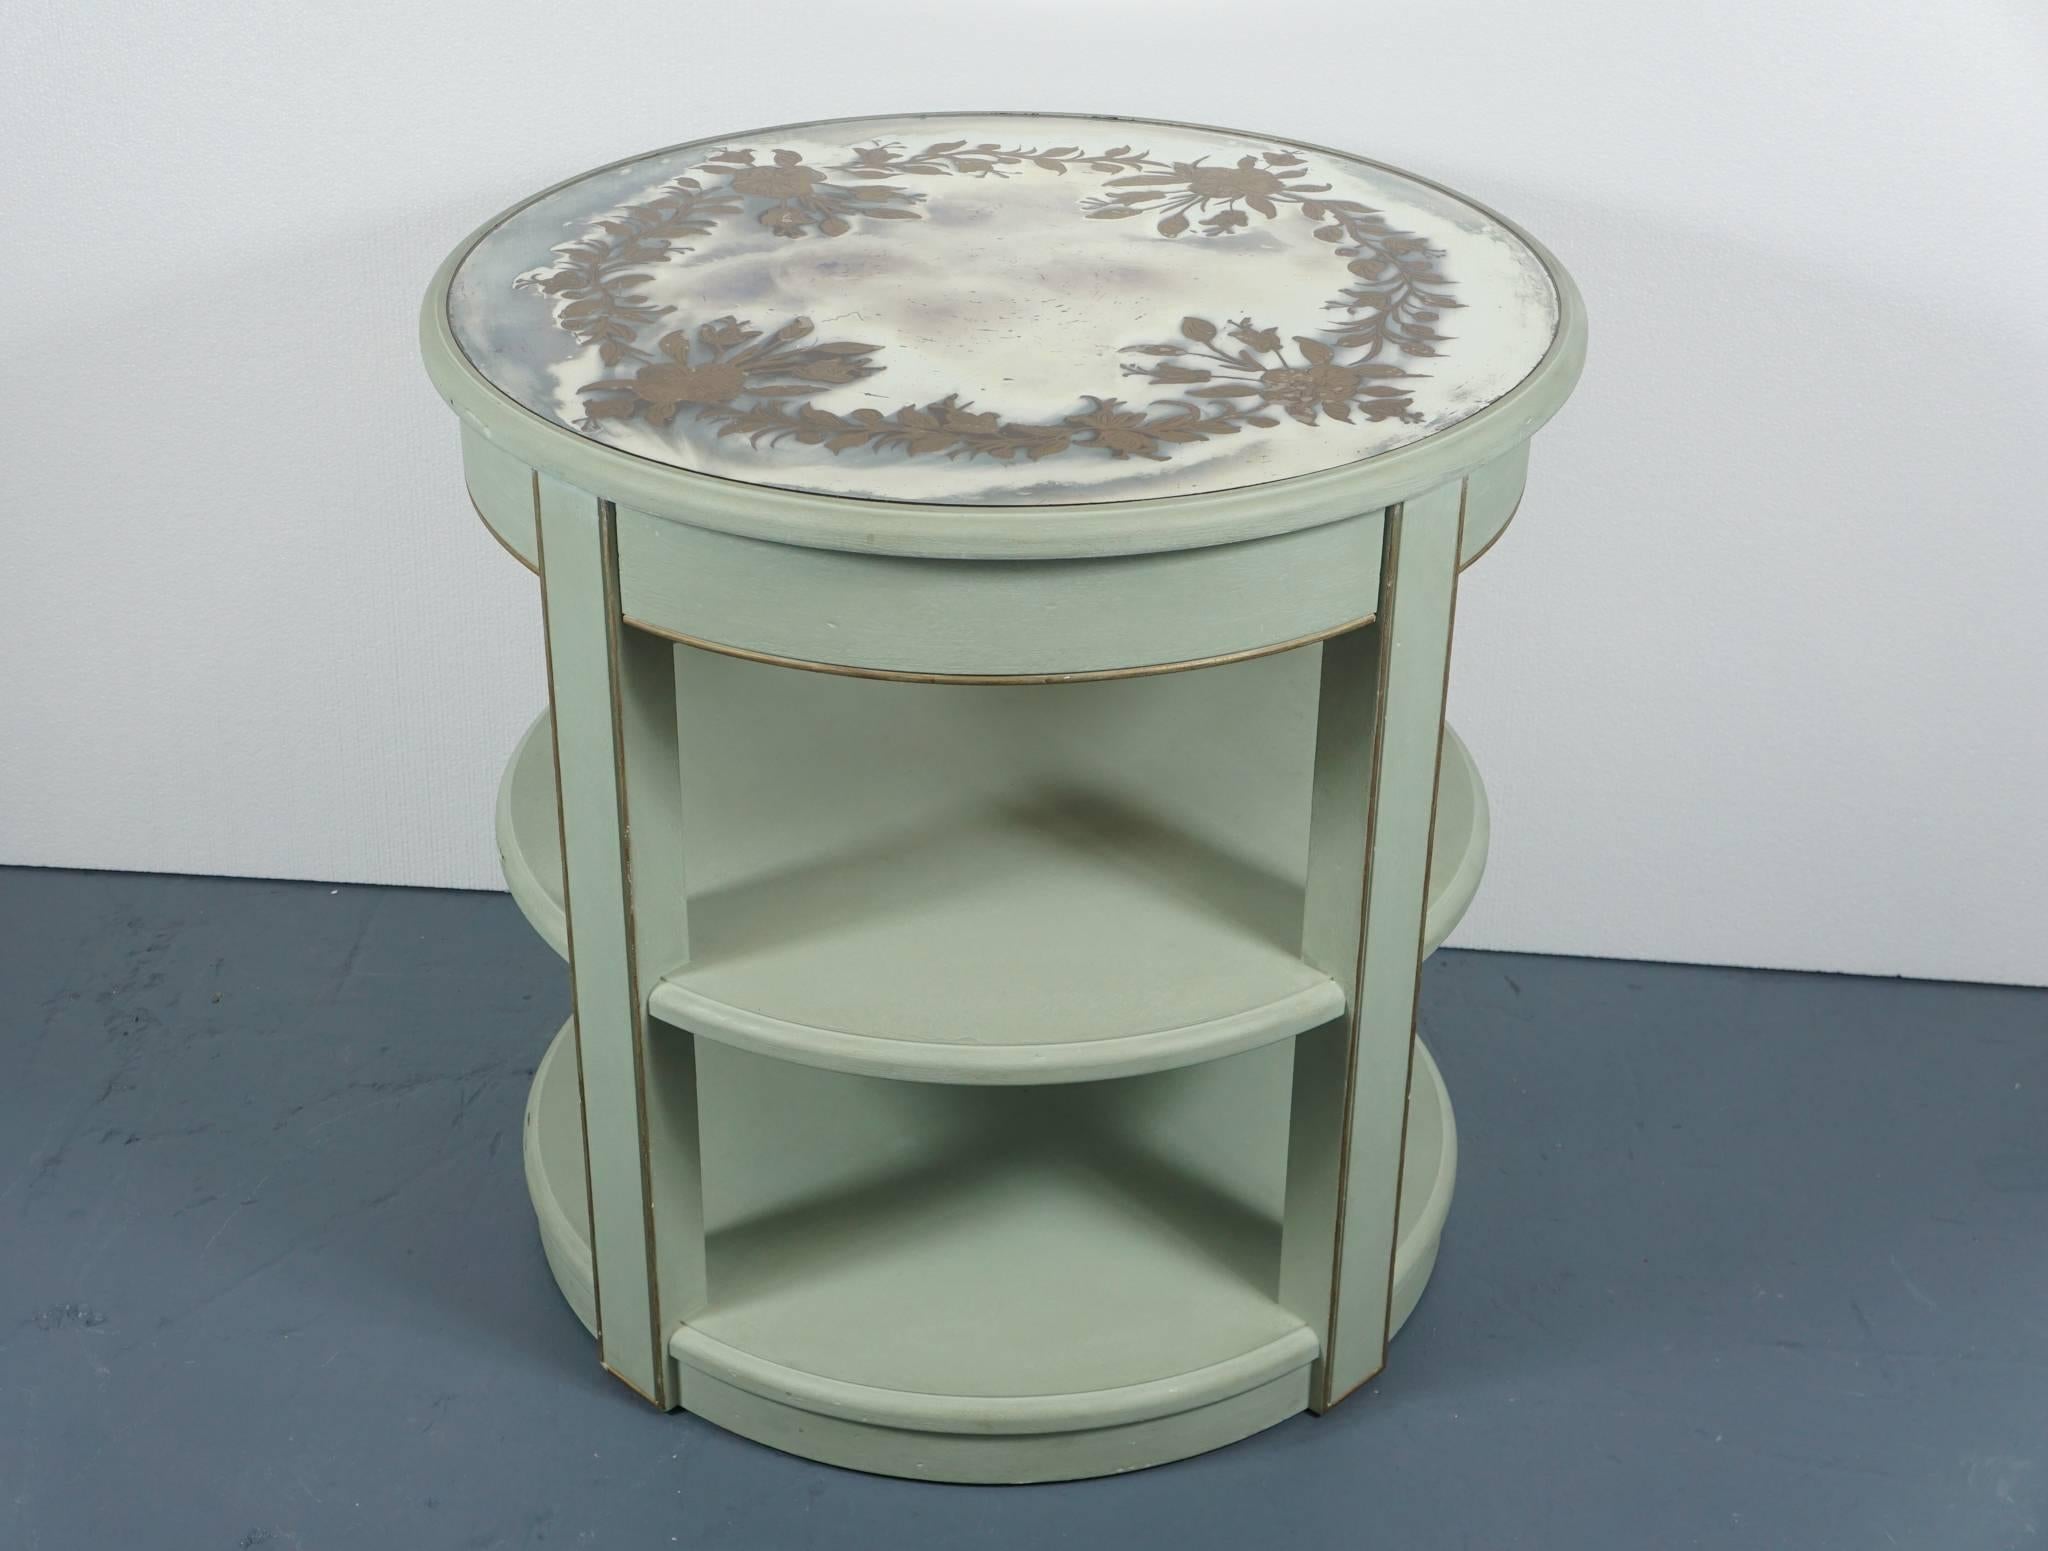 Here is an elegant two-tiered round table in a custom painted celadon finish with gold trim. The table top is an antique Églomisé with a gold painted flower and leaf motif. There is a centre drawer under the table top.